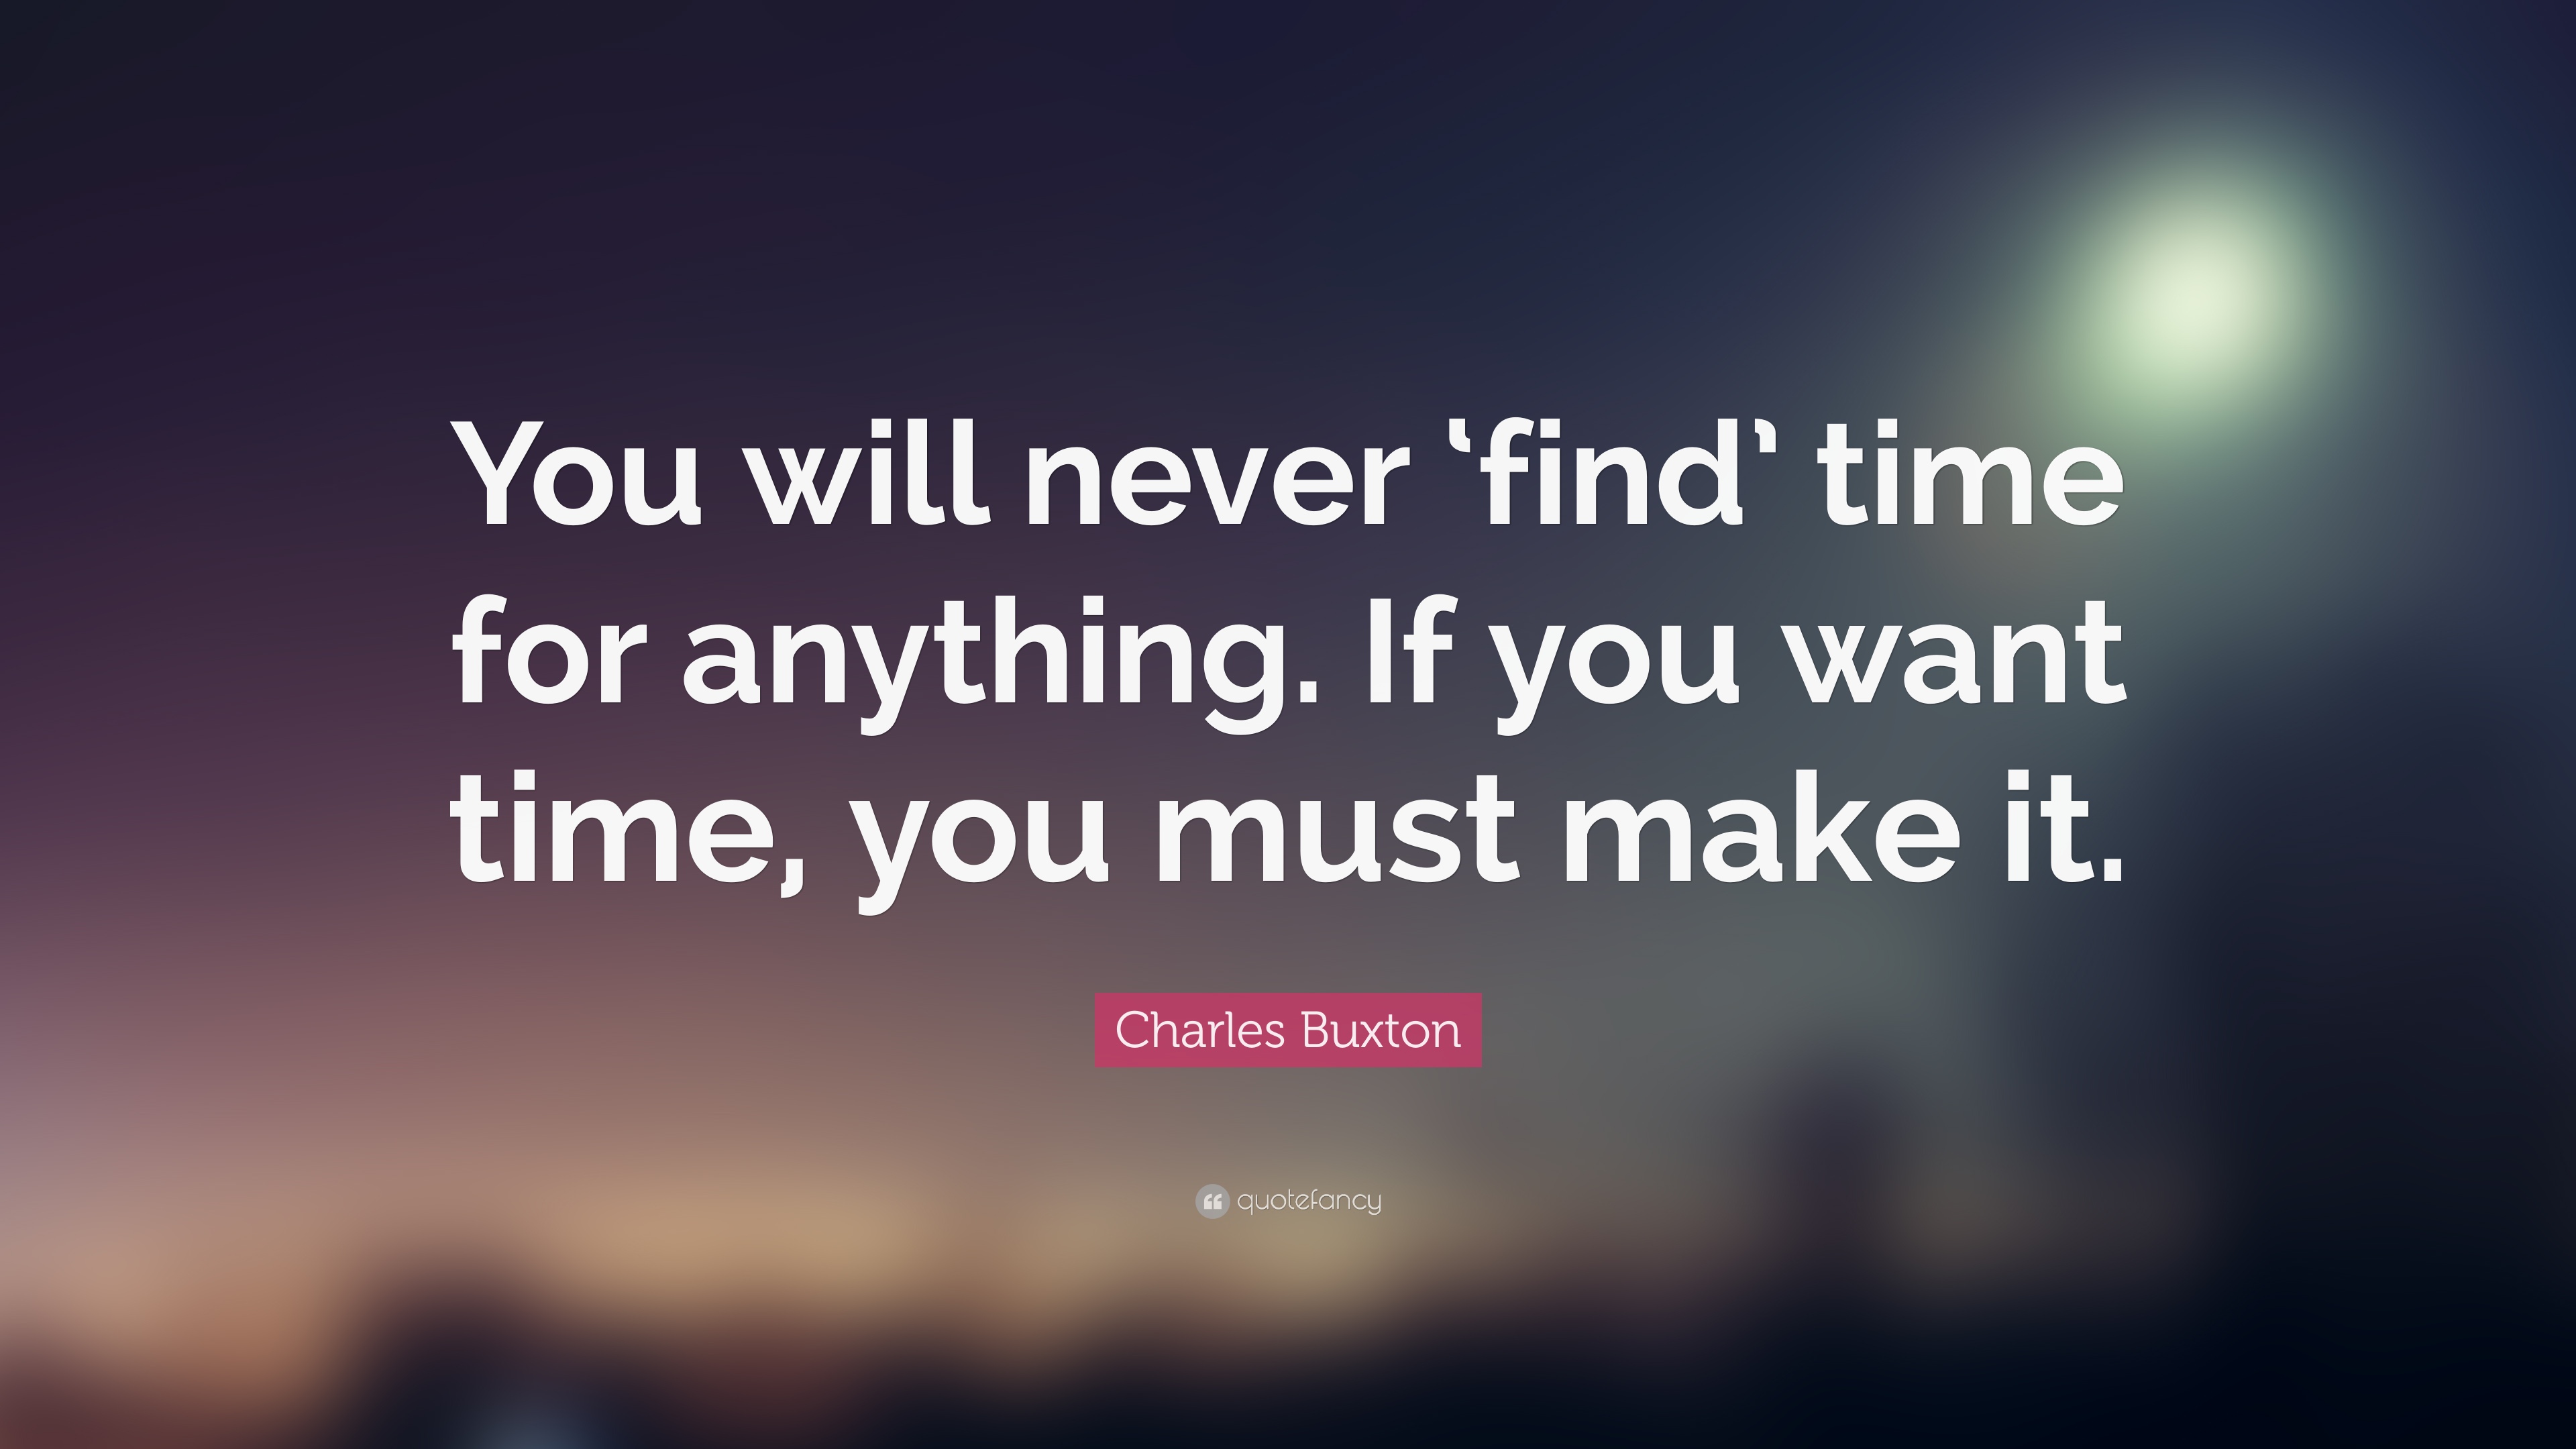 You will never ‘find’ time for anything. If you want time, you must make it